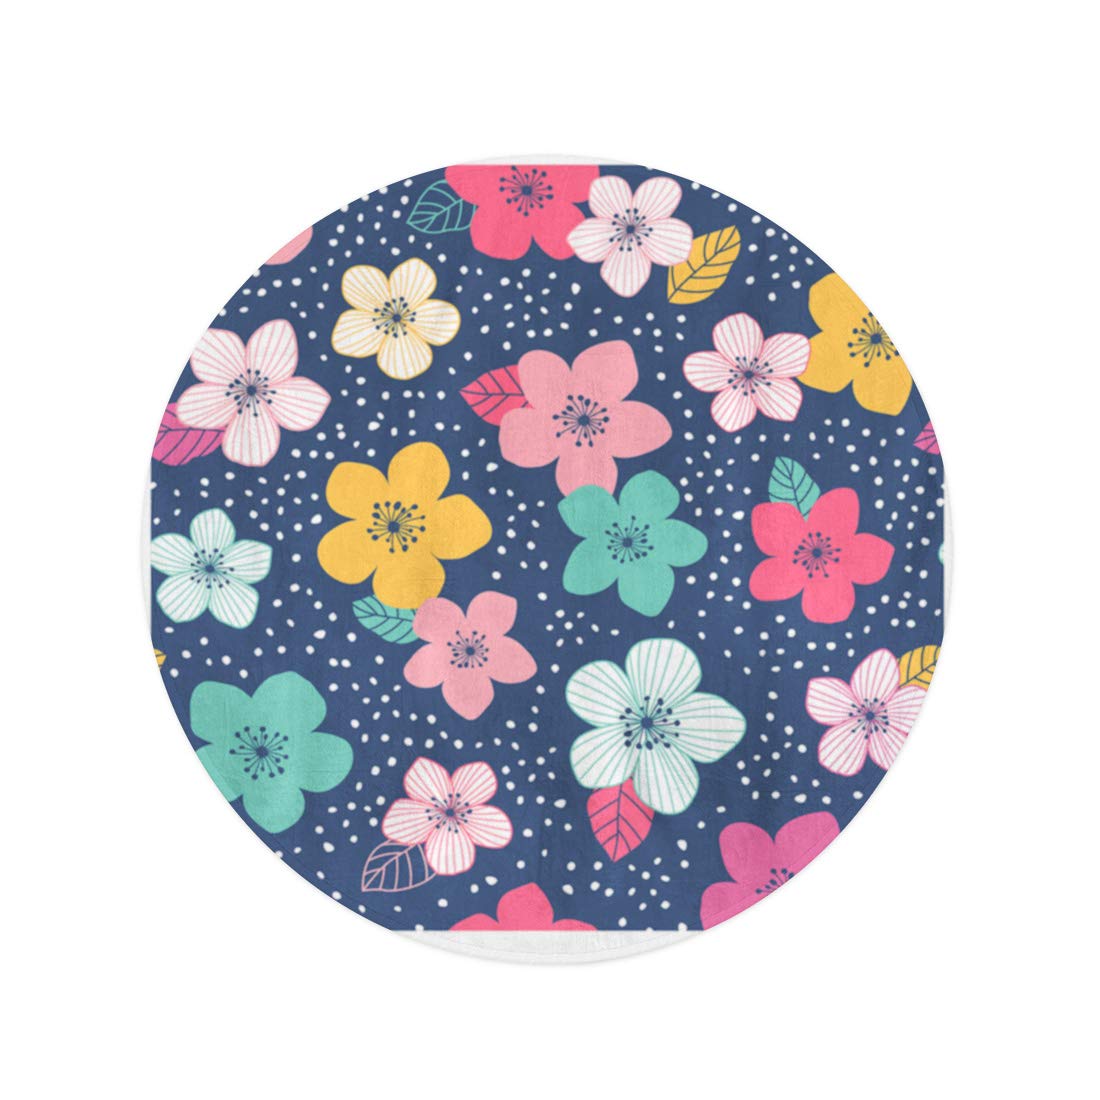 KDAGR 60 inch Round Beach Towel Blanket Flower Colorful Floral Pattern Dot Simple Summer Cute Pretty Travel Circle Circular Towels Mat Tapestry Beach Throw - image 2 of 2